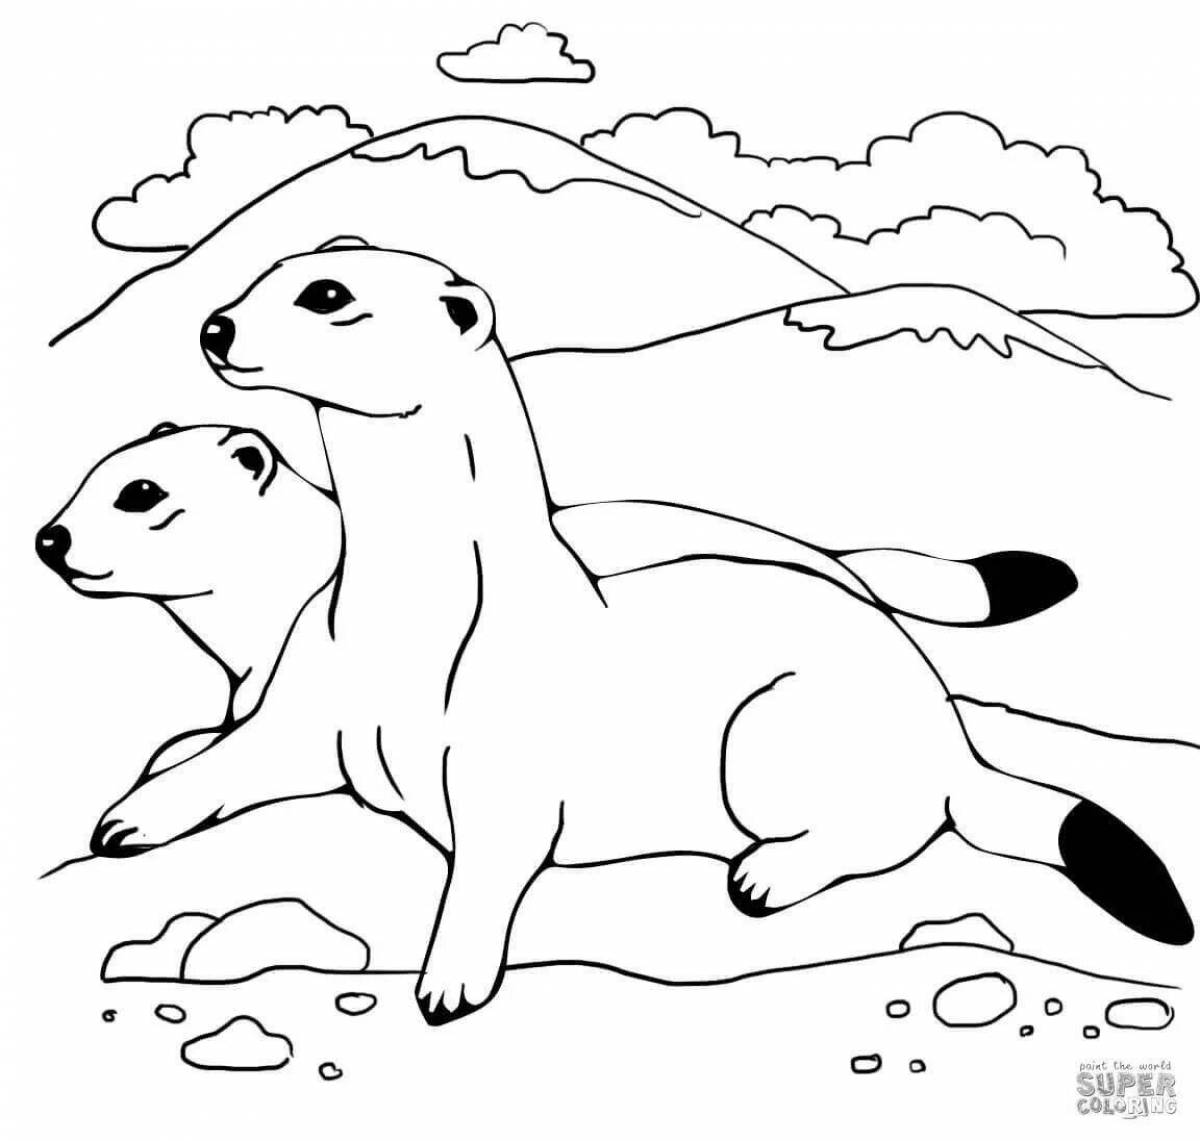 Colourful stoat coloring for kids